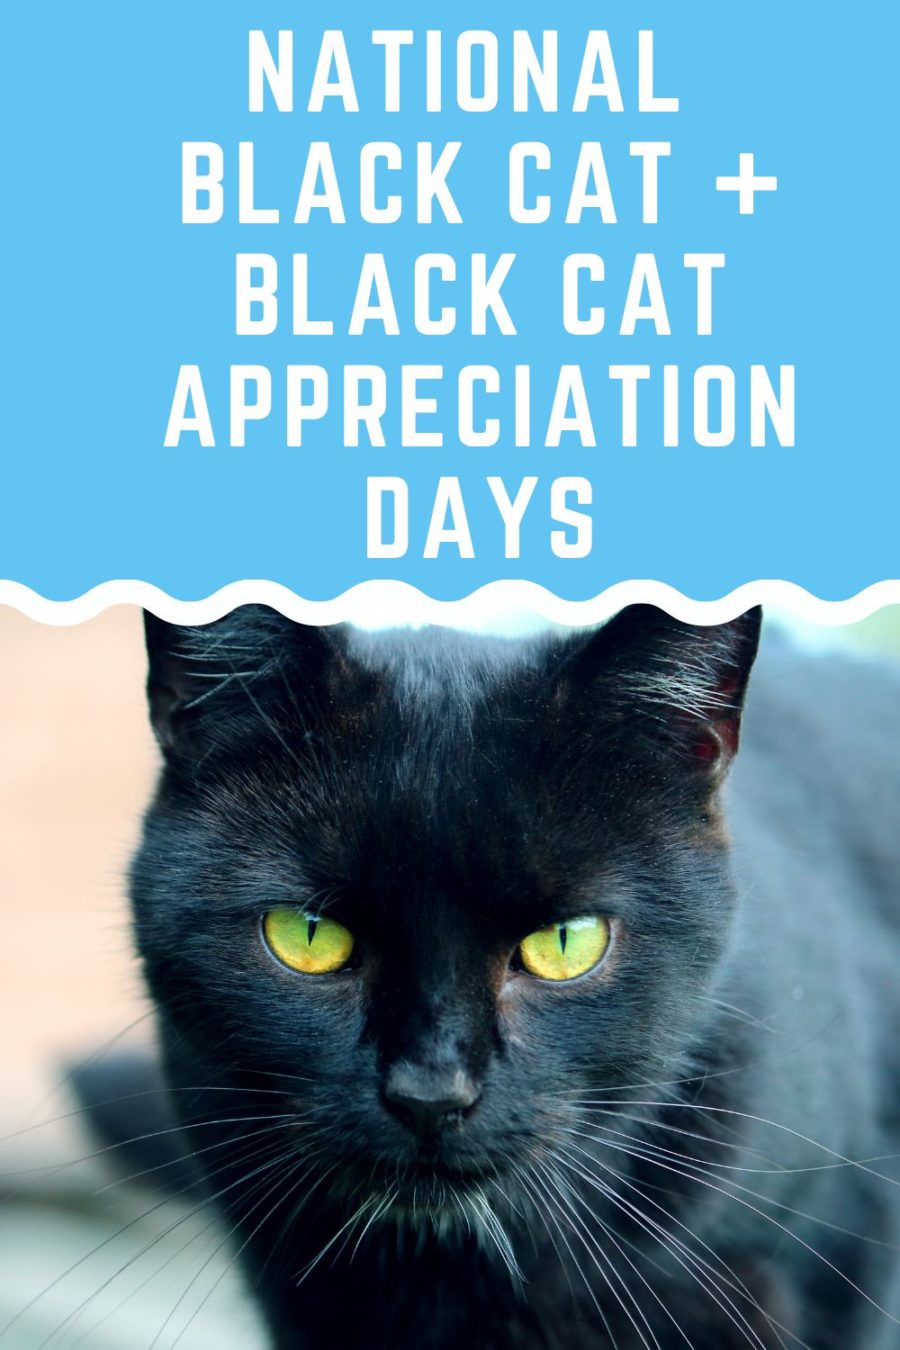 National Black Cat Appreciation Day and National Black Cat Day